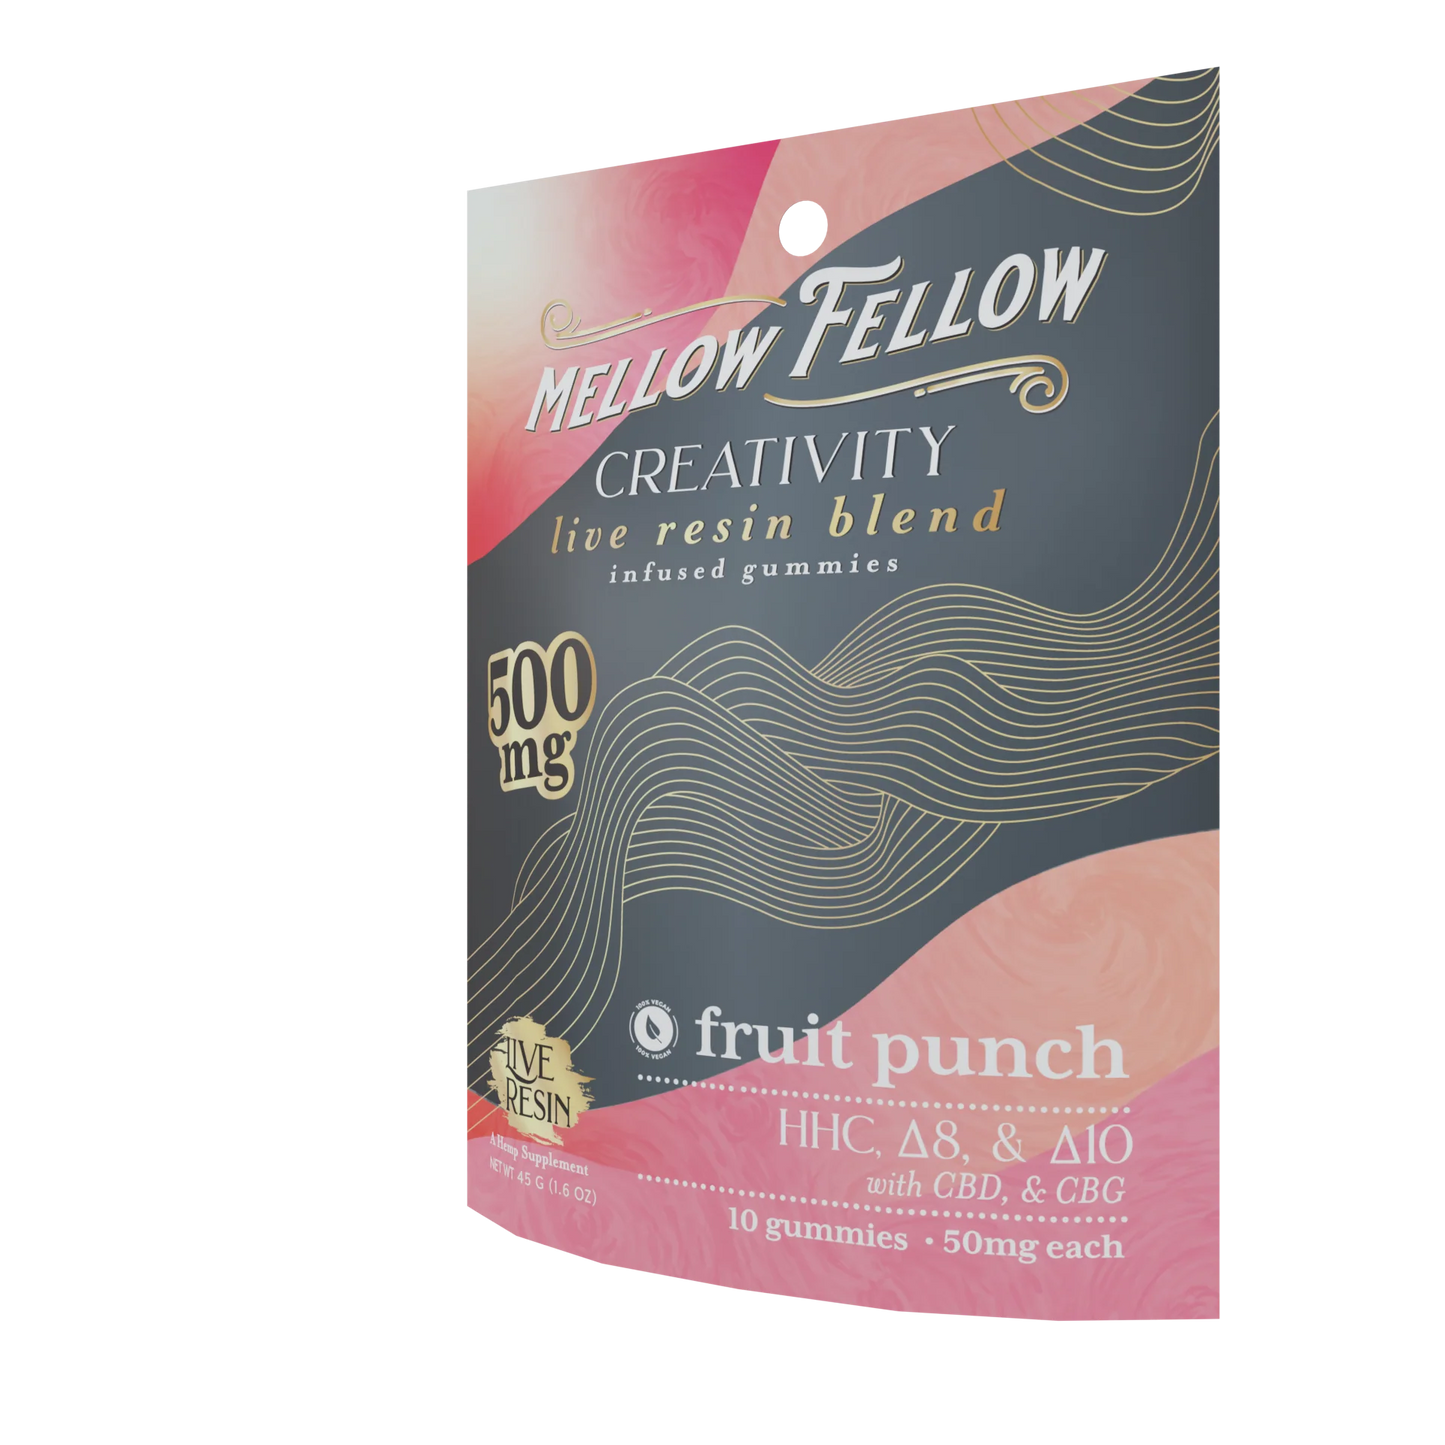 Mellow Fellow Creativity Blend Live Resin M-Fusions Edibles Fruit Punch 500mg Best Sales Price - Edibles